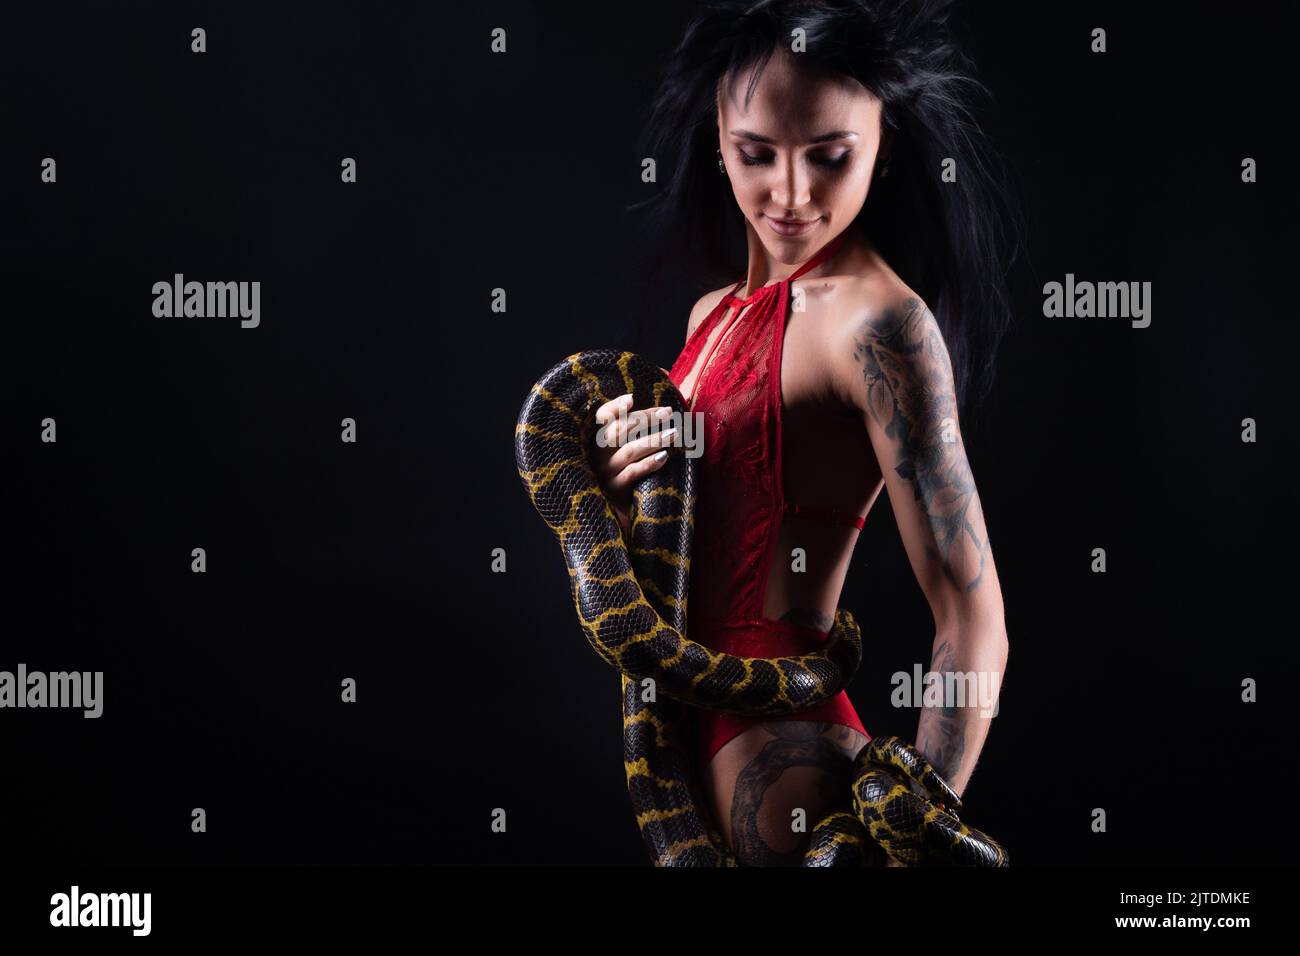 Photo of brunette woman with blowing hair holding snake Stock Photo